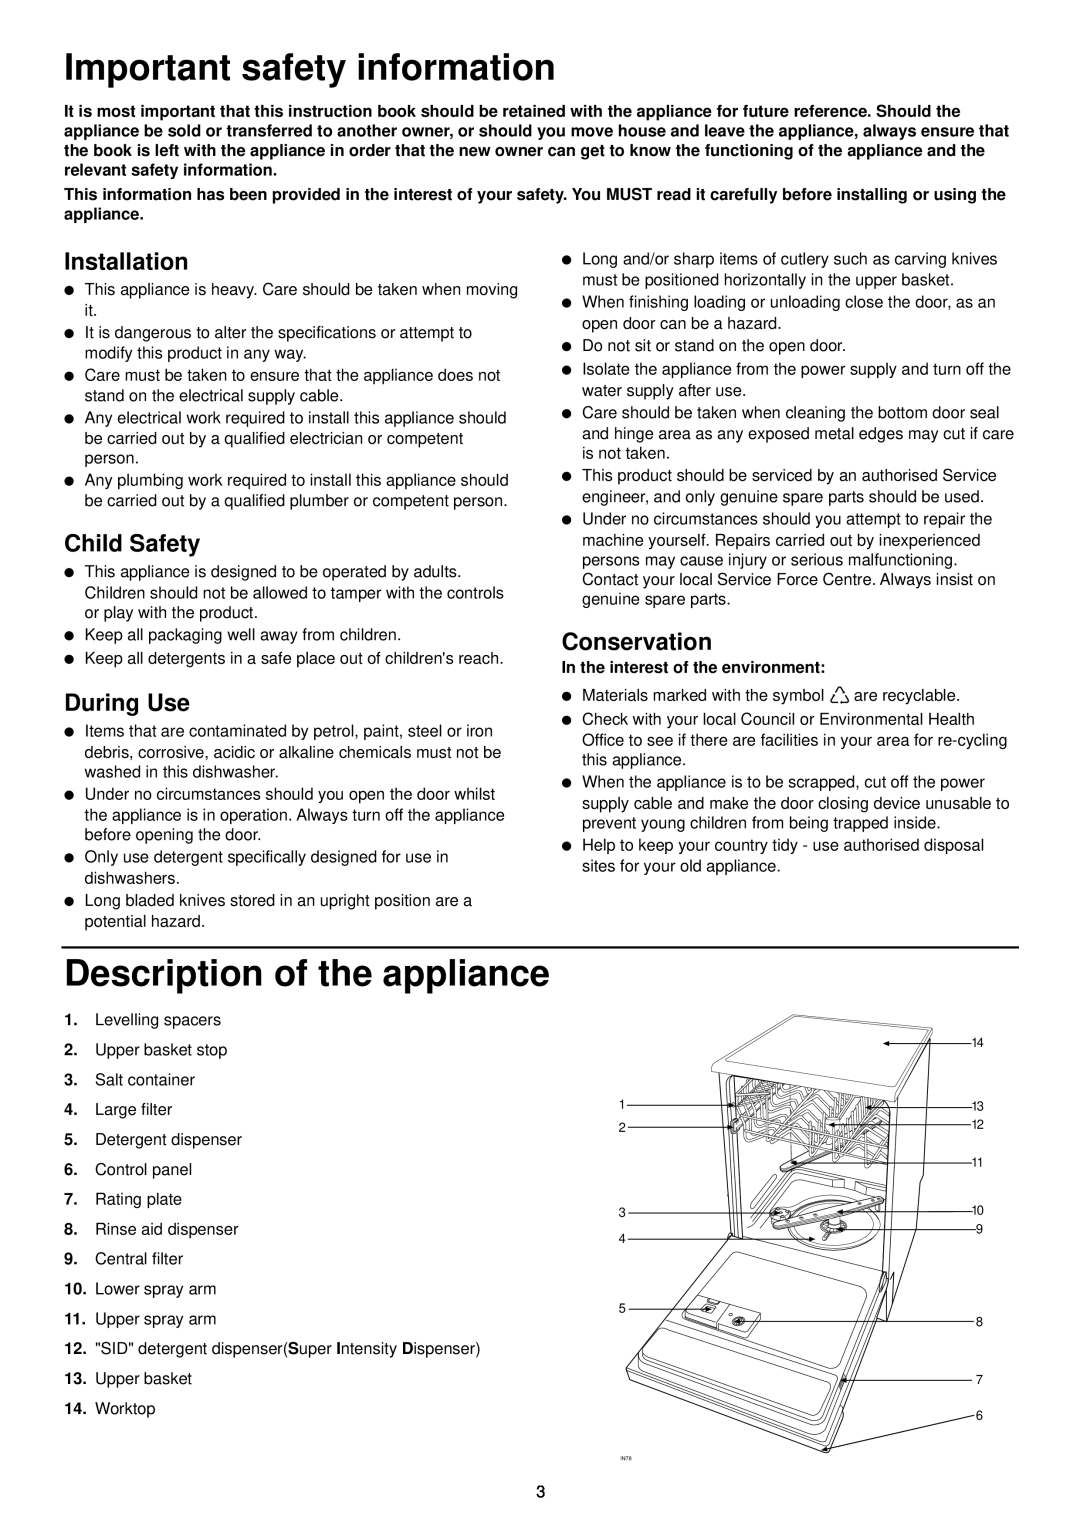 Zanussi DE 6755 manual Important safety information, Description of the appliance, Installation, Child Safety, During Use 